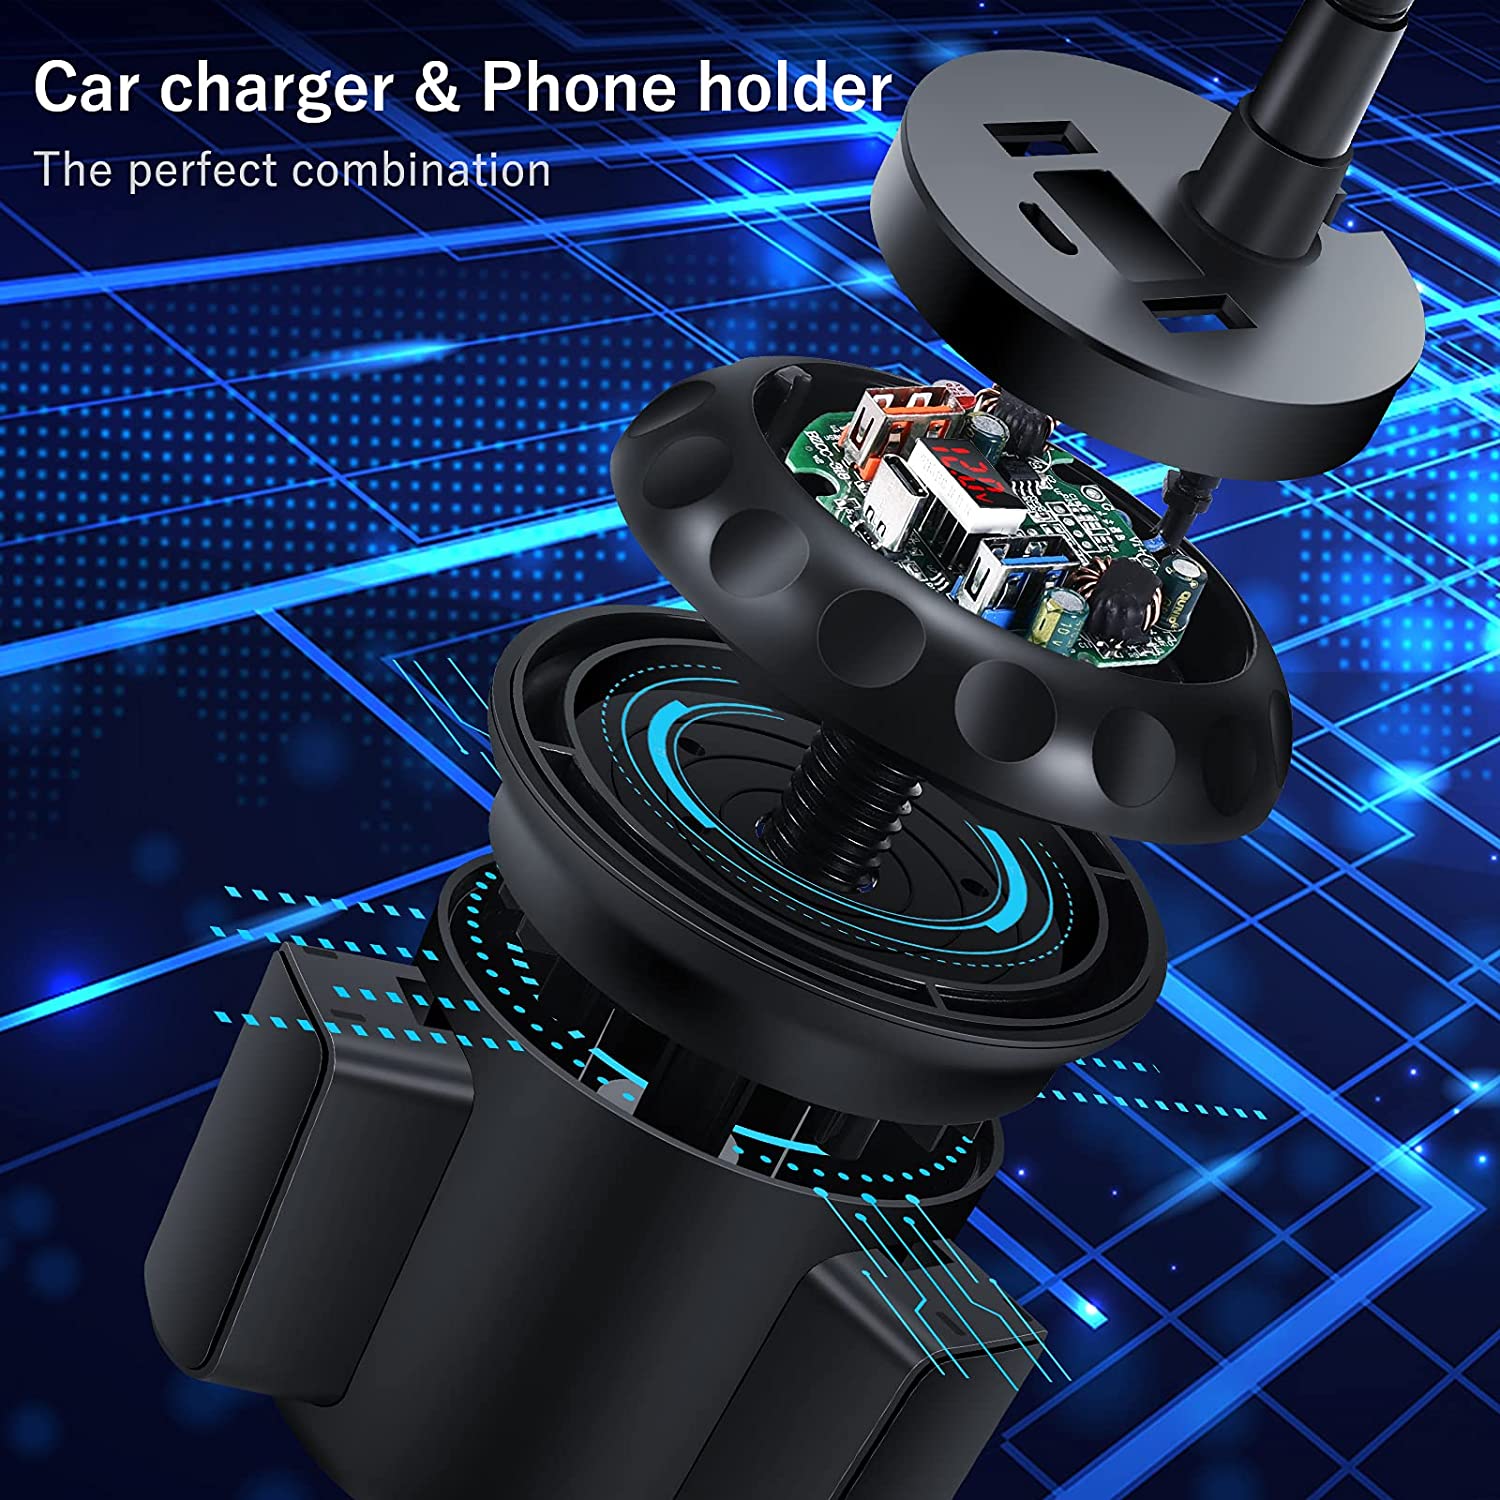 [Upgraded] HVDI Cup Holder Phone Mount, 36W Car Charger 3-Ports Fast Charging Cell Phone Mount Universal Adjustable Cradle for iPhone 12 Pro Max/11/XR/XS/X/8/Samsung S21 Ultra/S20/S10/Note 10/9/8